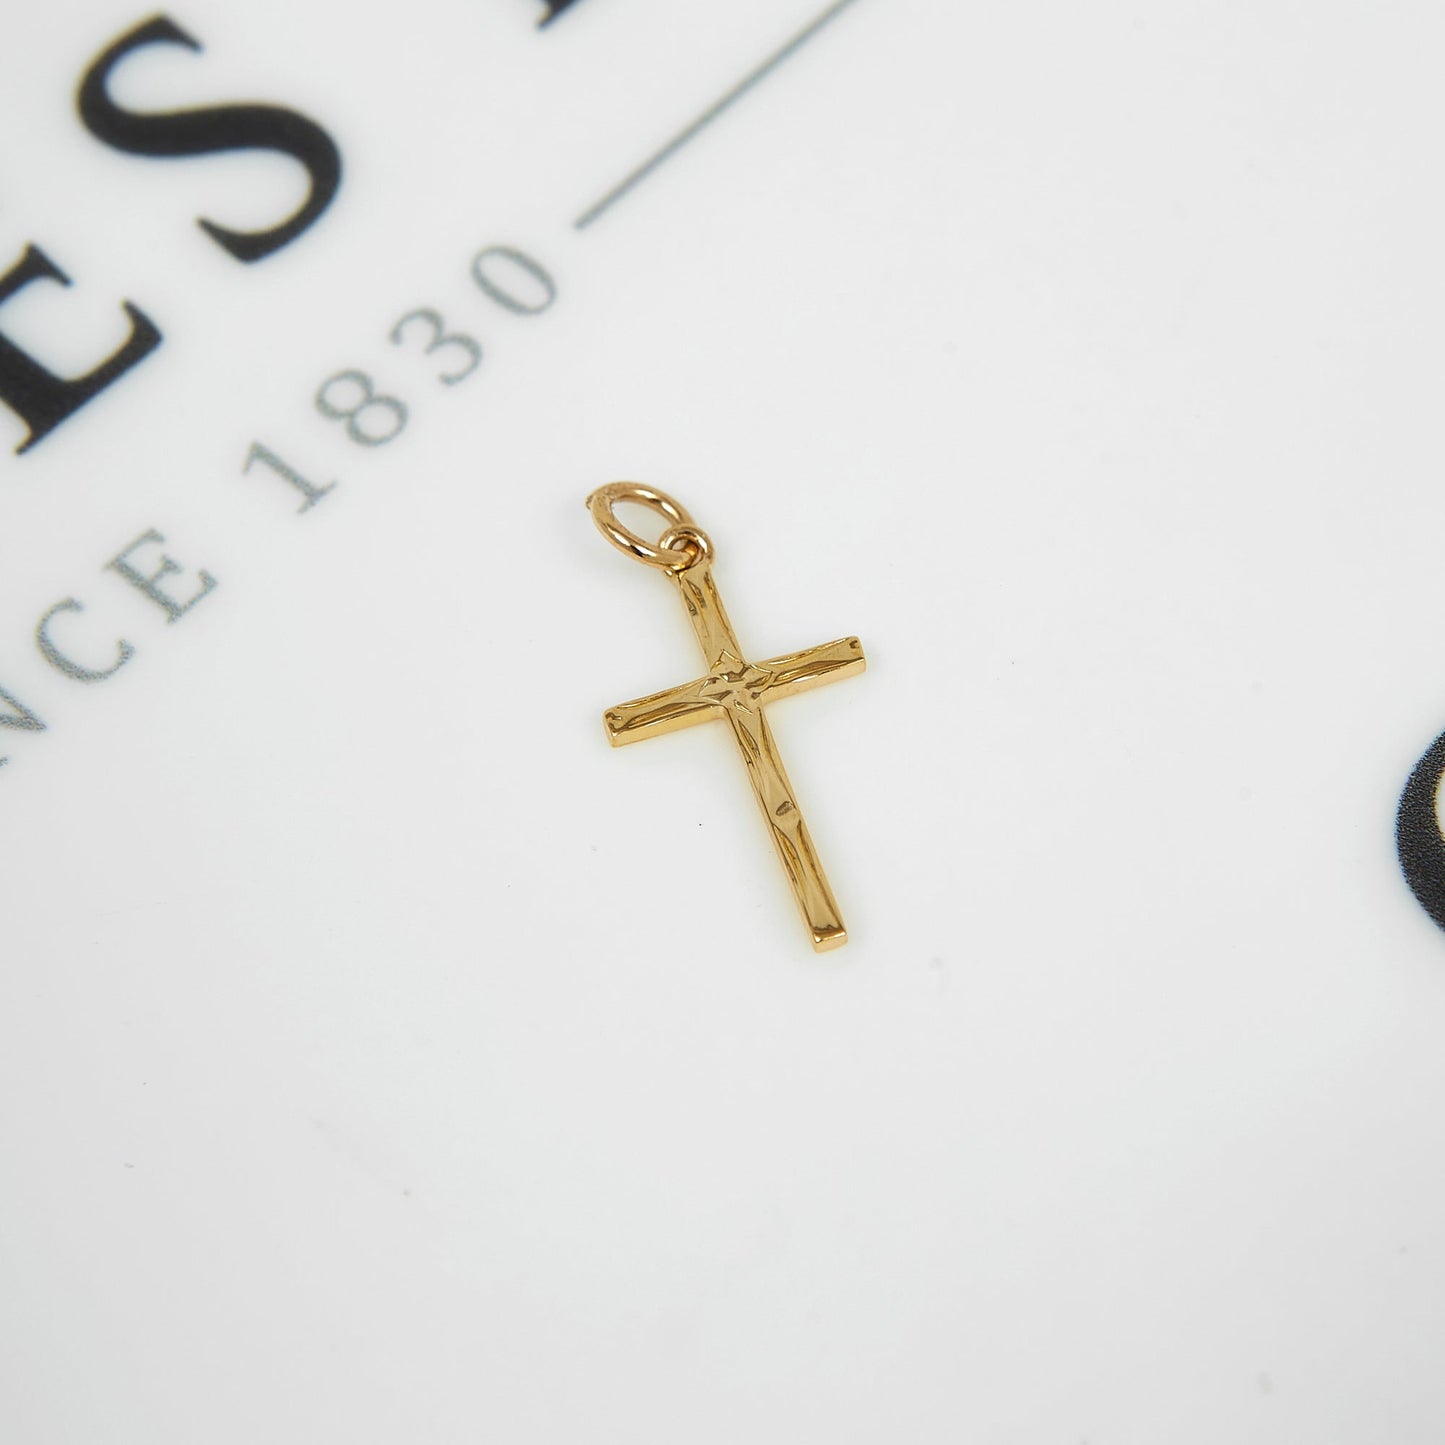 Pre-Owned 9ct Yellow Gold Small Patterned Cross Pendant